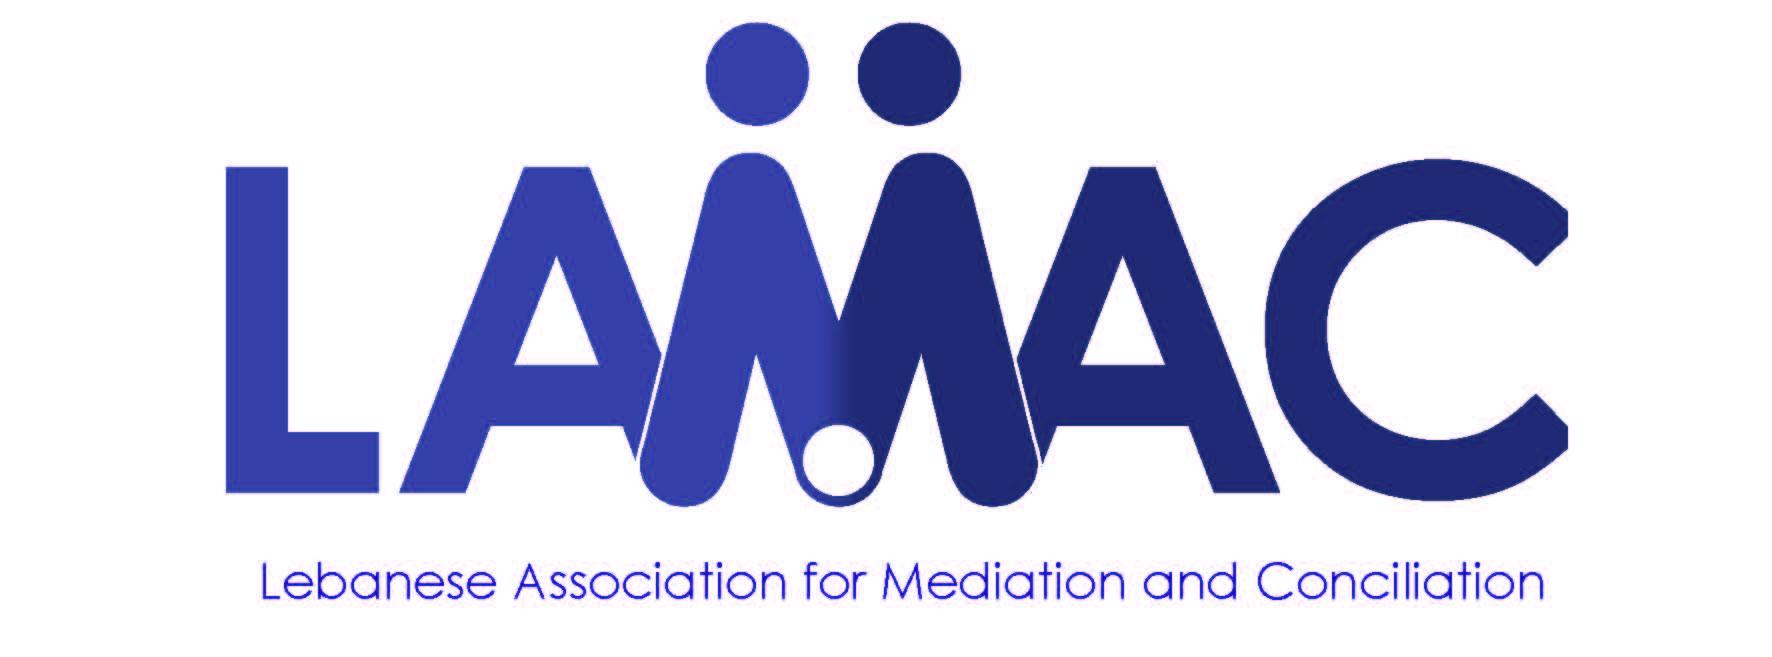 Lebanese Association for Mediation and Conciliation (LAMAC)